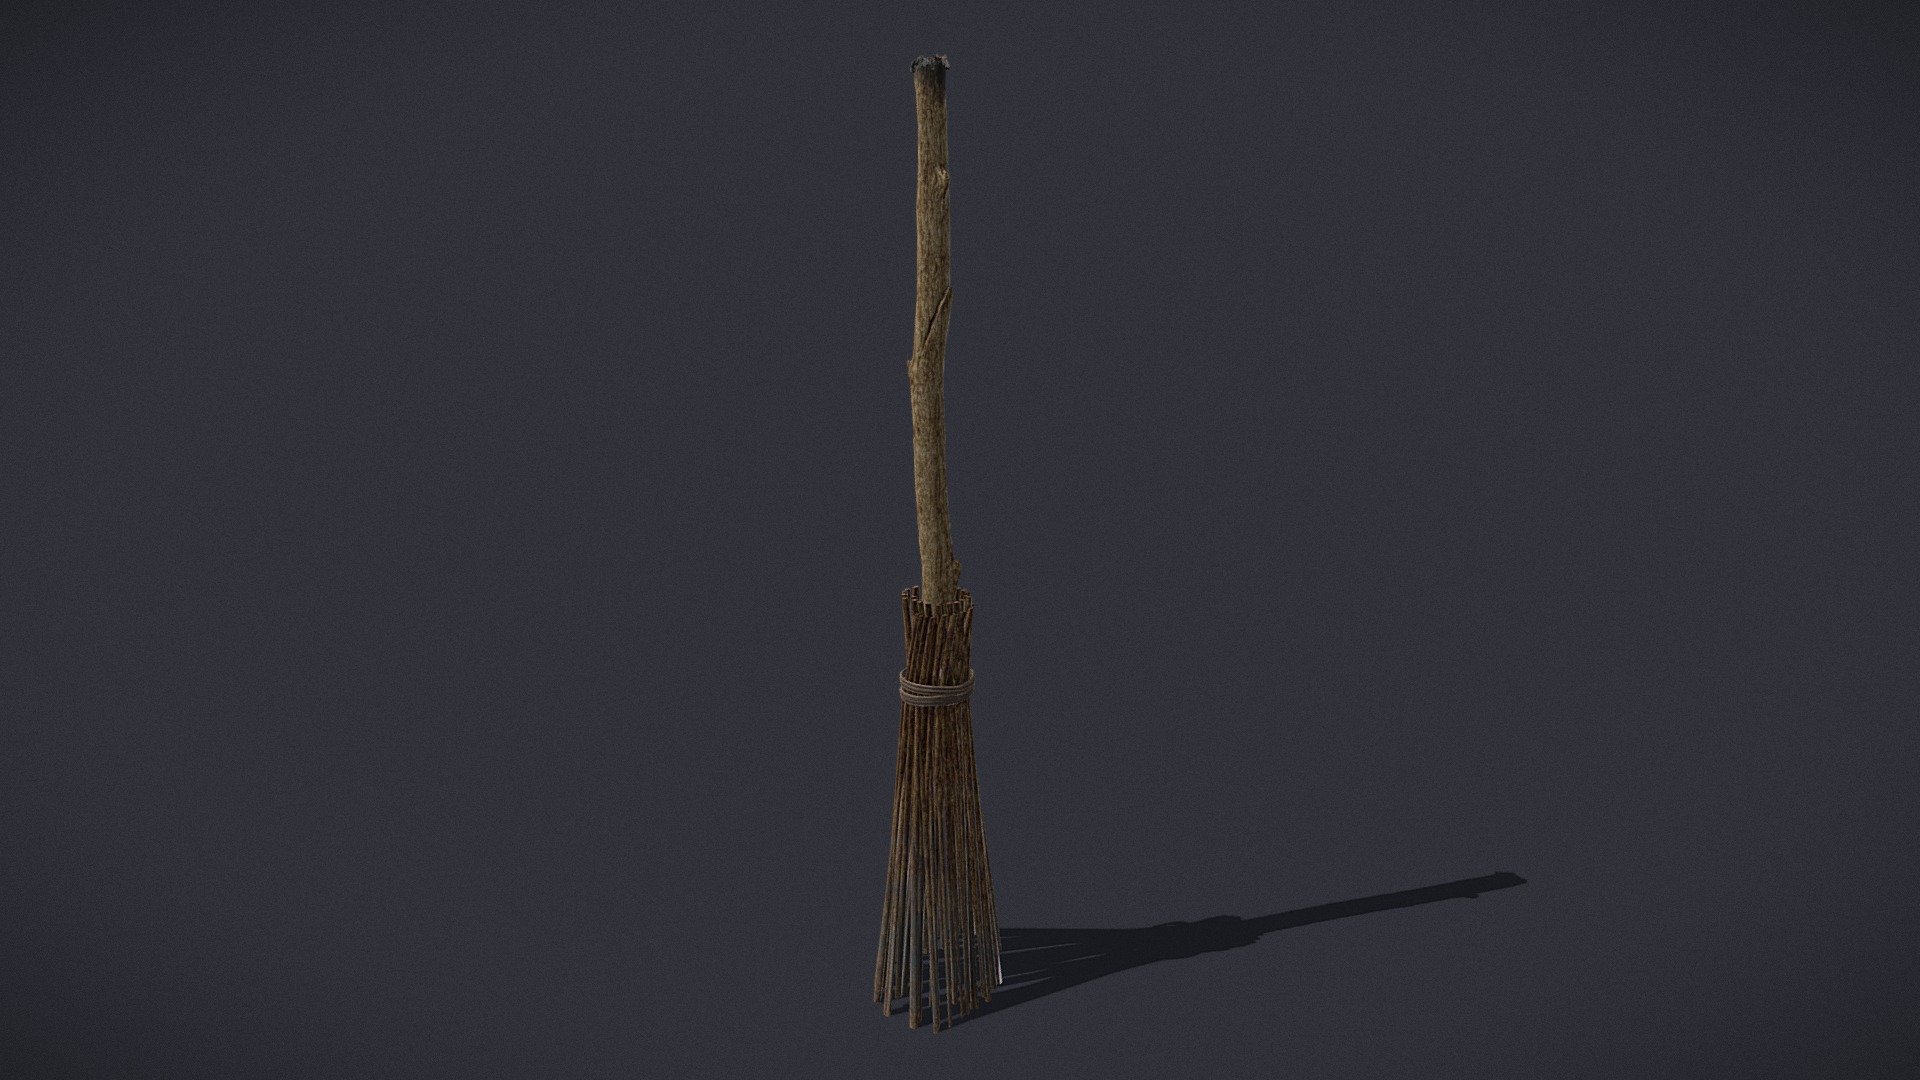 Medieval Style Broom High Quality 3D Model PBR Texture available in 4096 x 4096 Maps include : Basecolor, Normal, Roughness, Height and Normal. All Preview renders were done Marmoset Toolbag 3.08 Scaled to real world scale. Customer Service Guaranteed. From the Creators at Get Dead Entertainment. Please like and Rate! Follow us on FaceBook and Instagram to keep updated on all our newest models 3d model